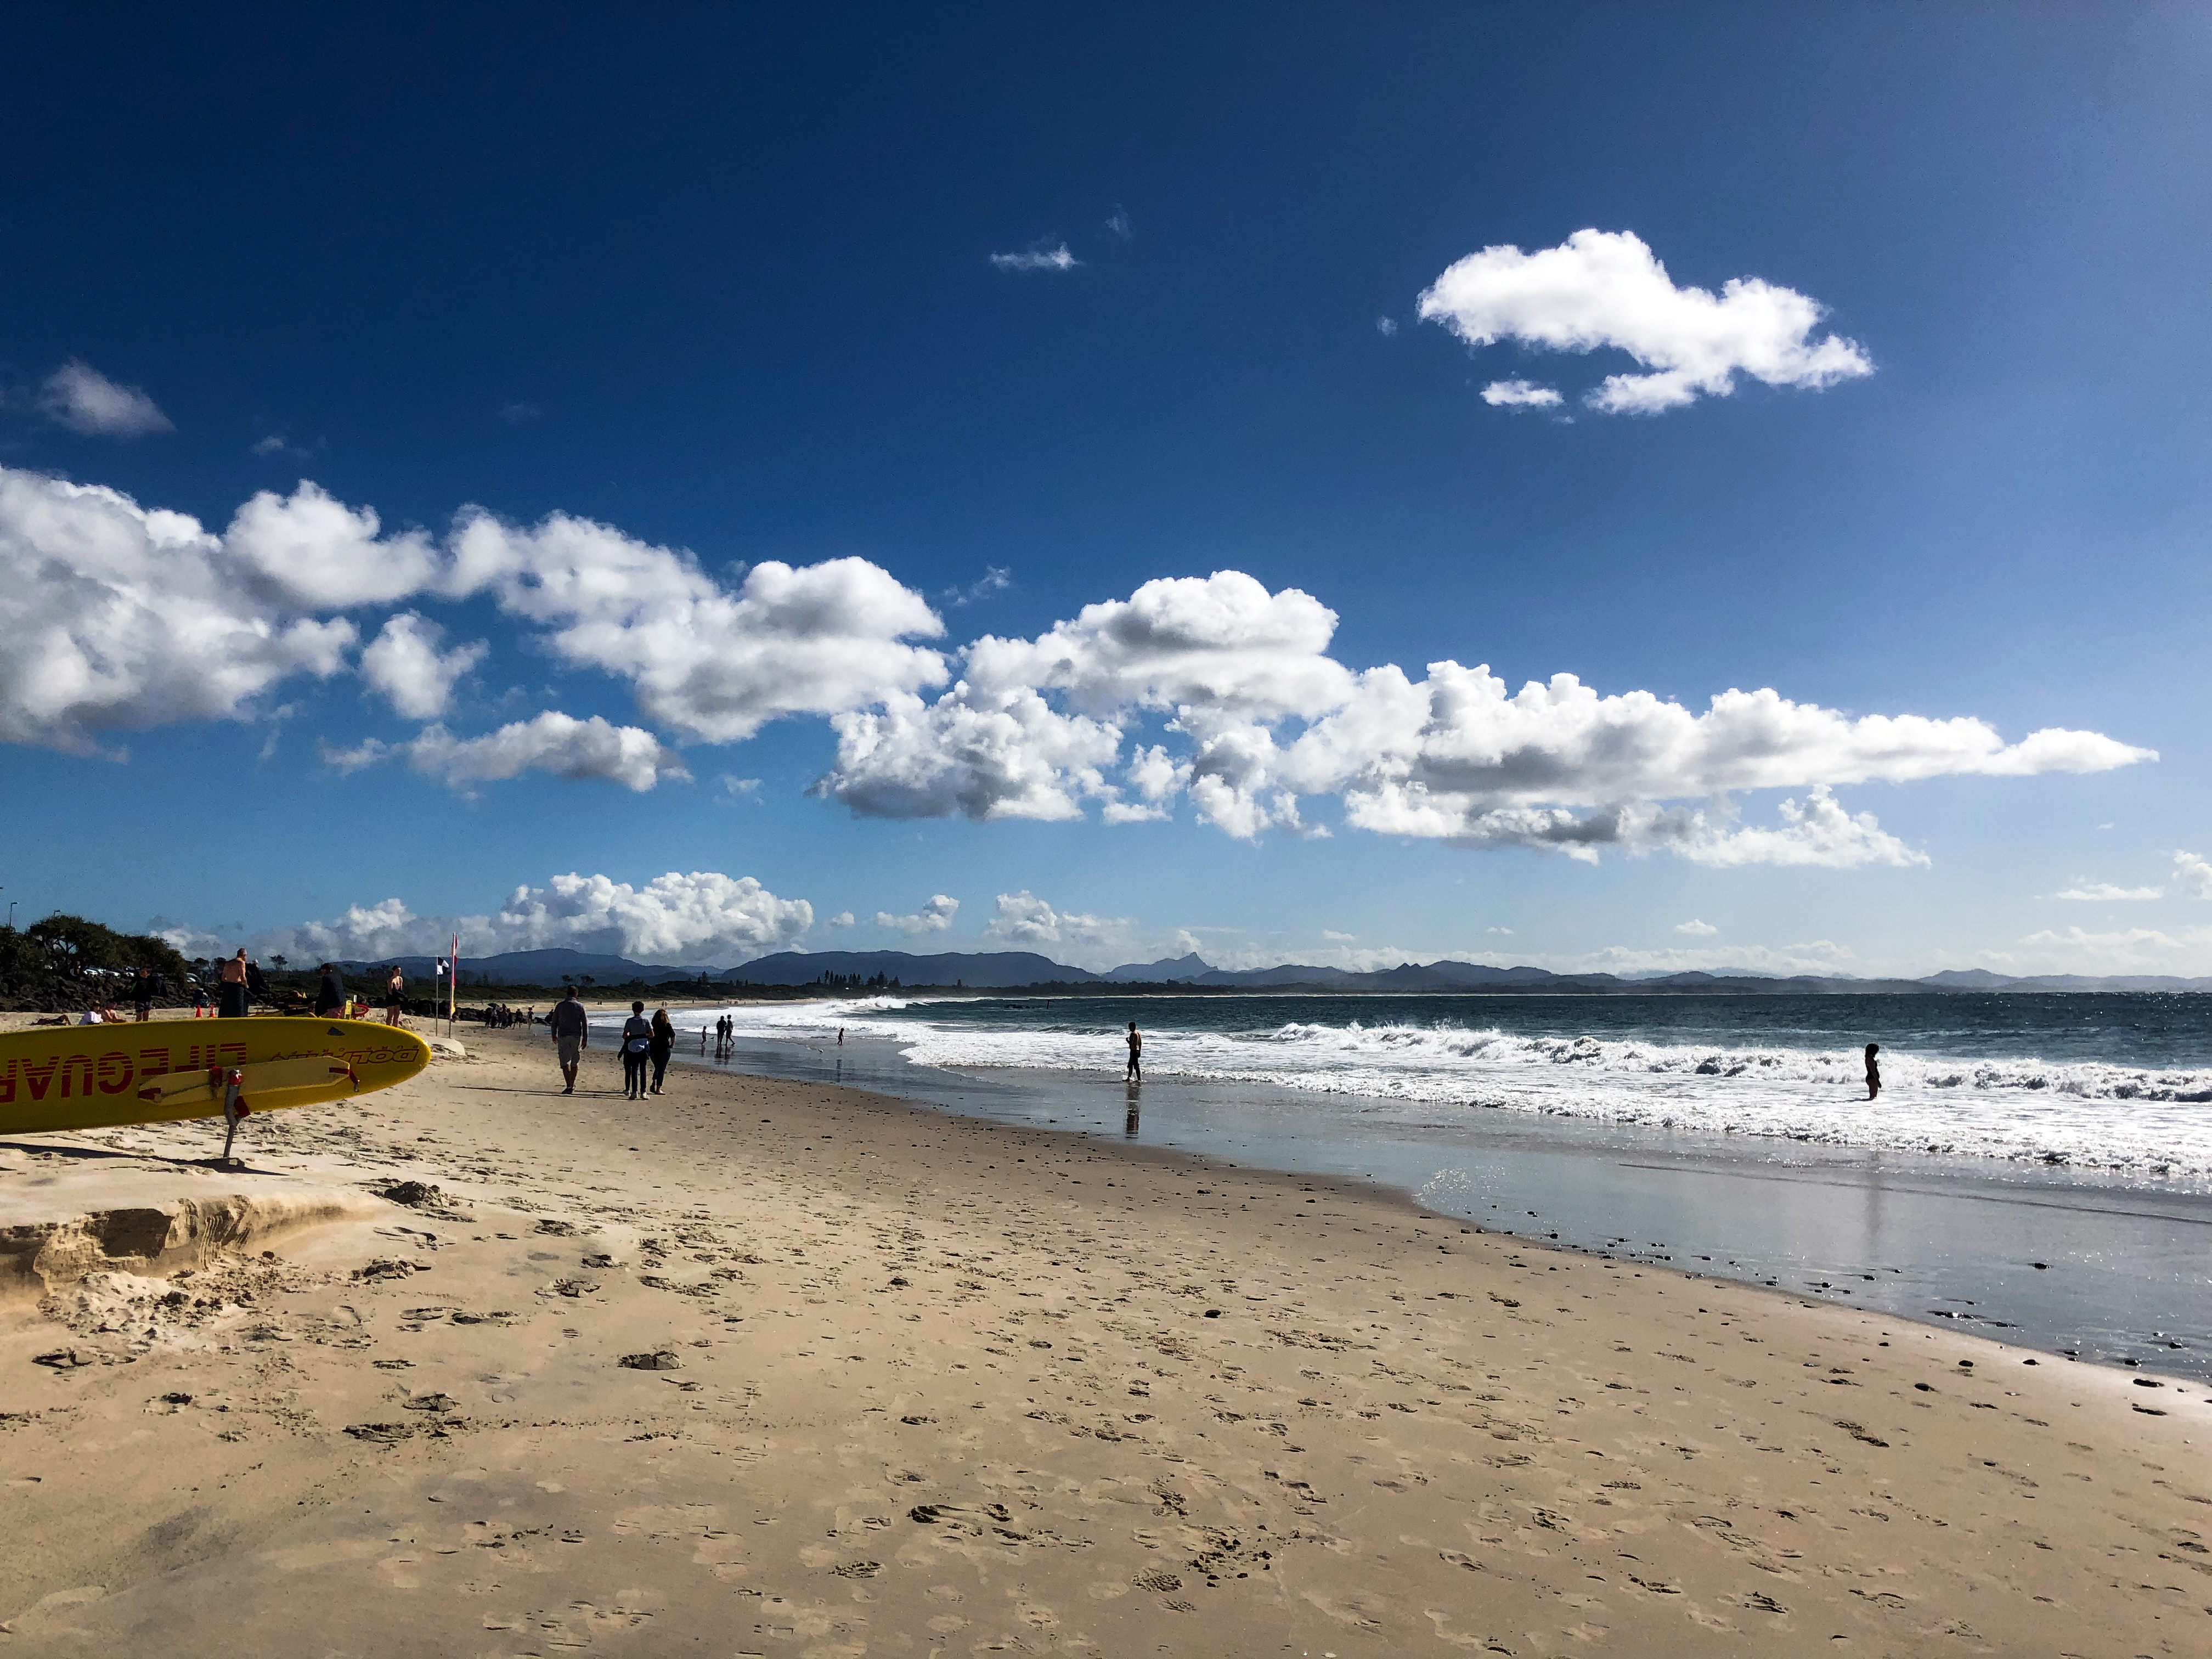 The main beach at Byron Bay makes for a beautiful day trip from Brisbane